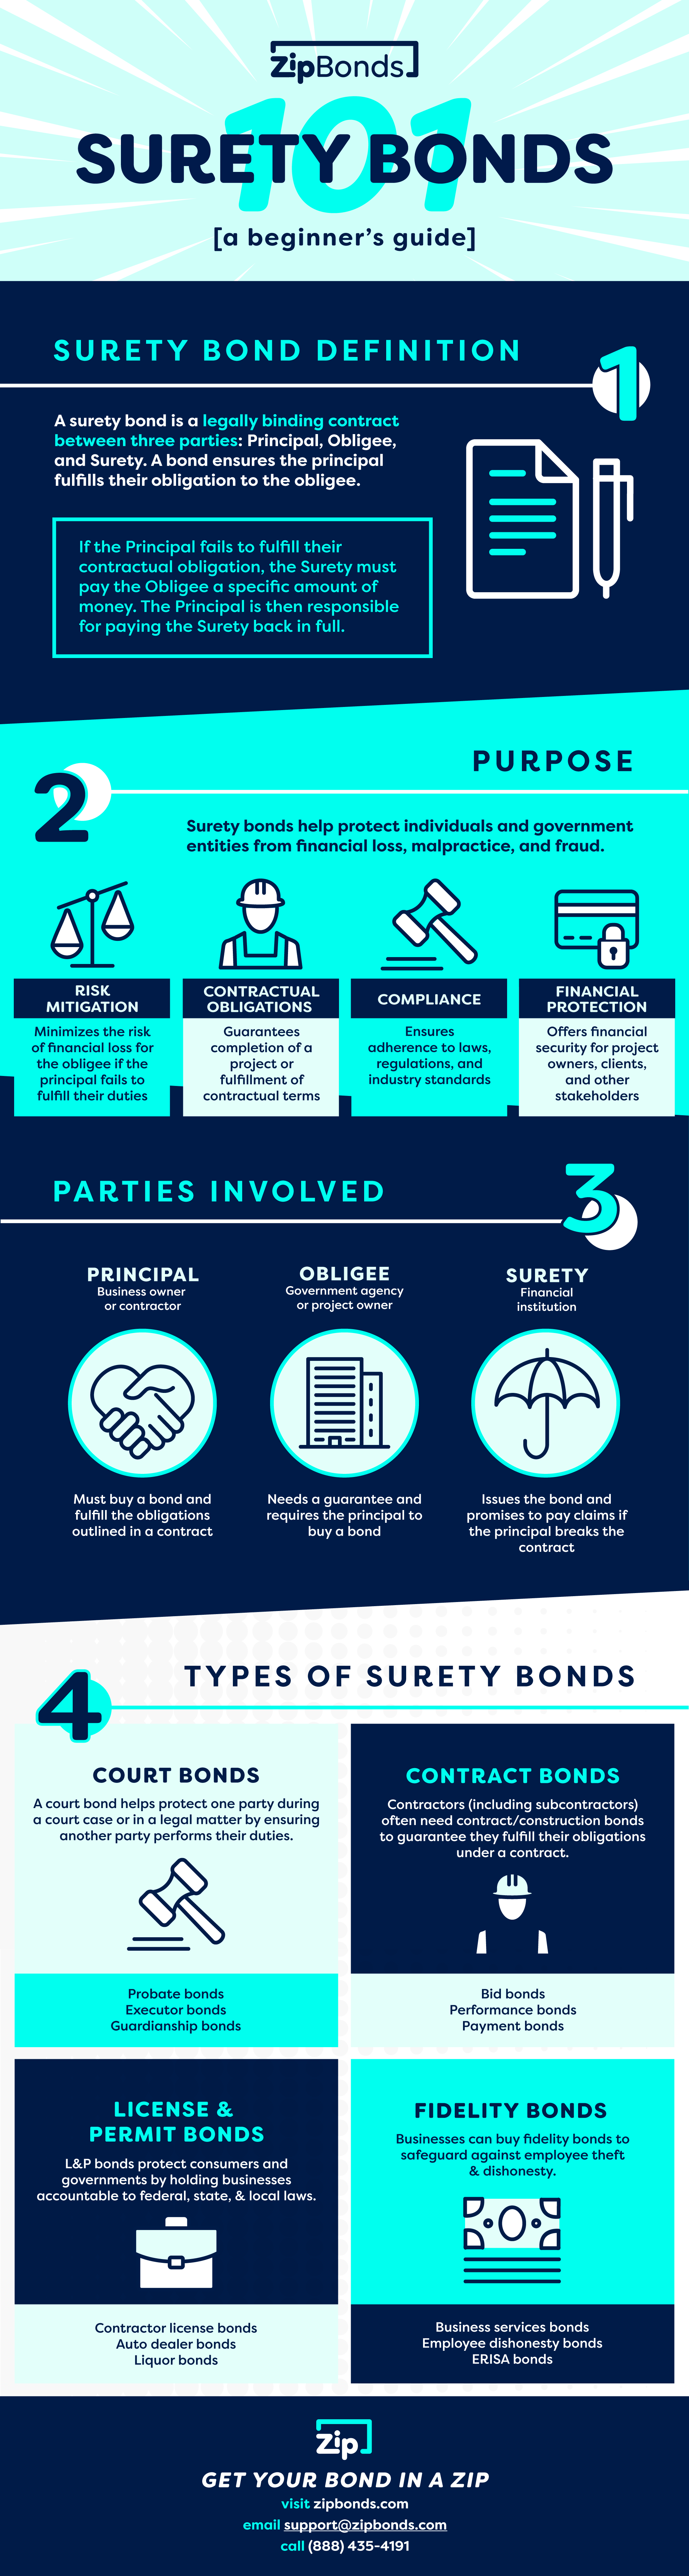 Infographic covering all the basics of surety bonds